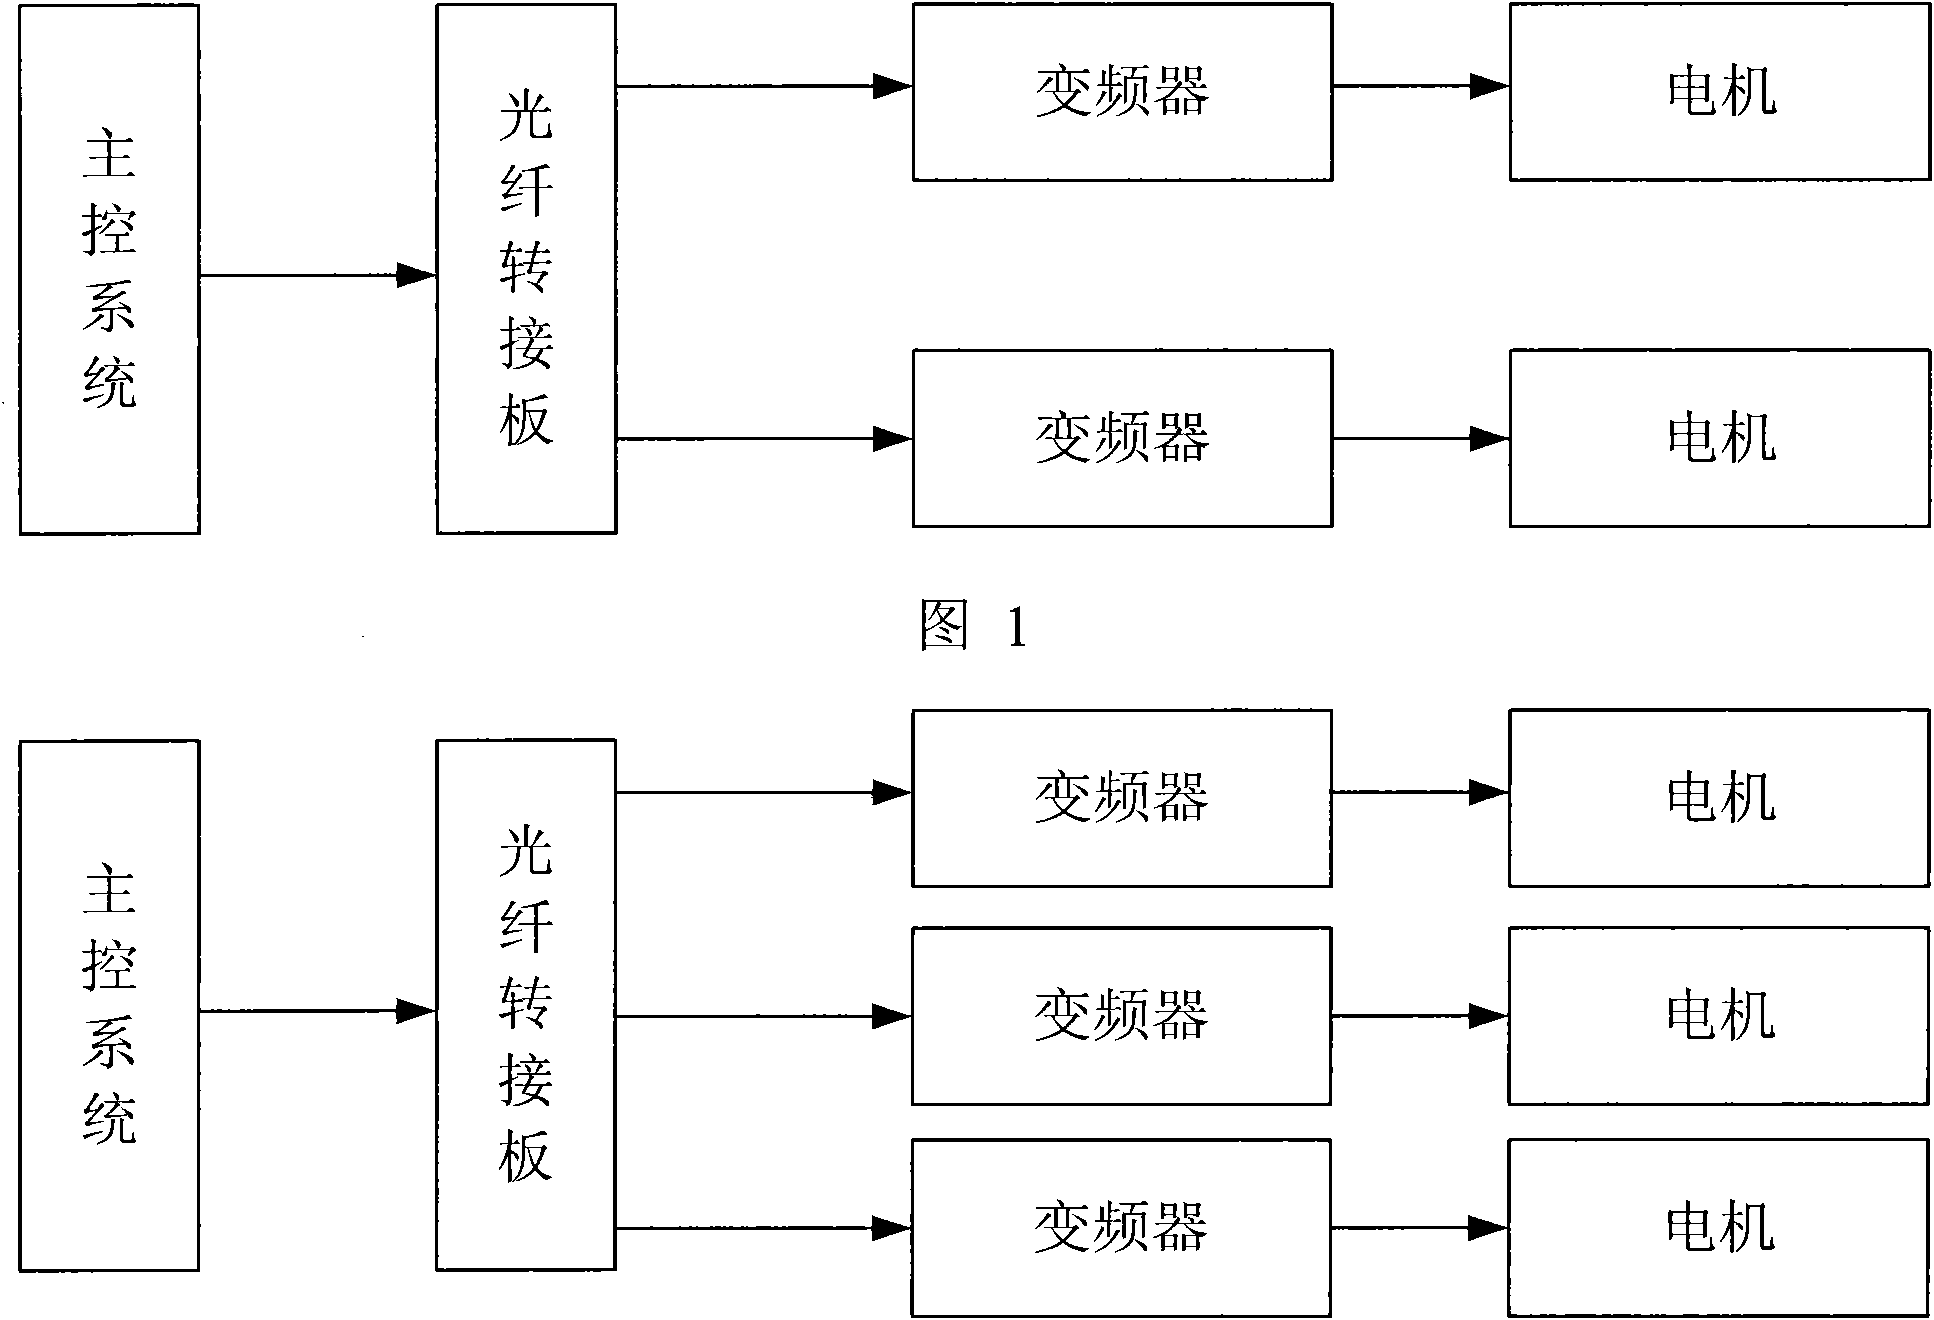 Master and slave control method based on high-voltage big-power transducer